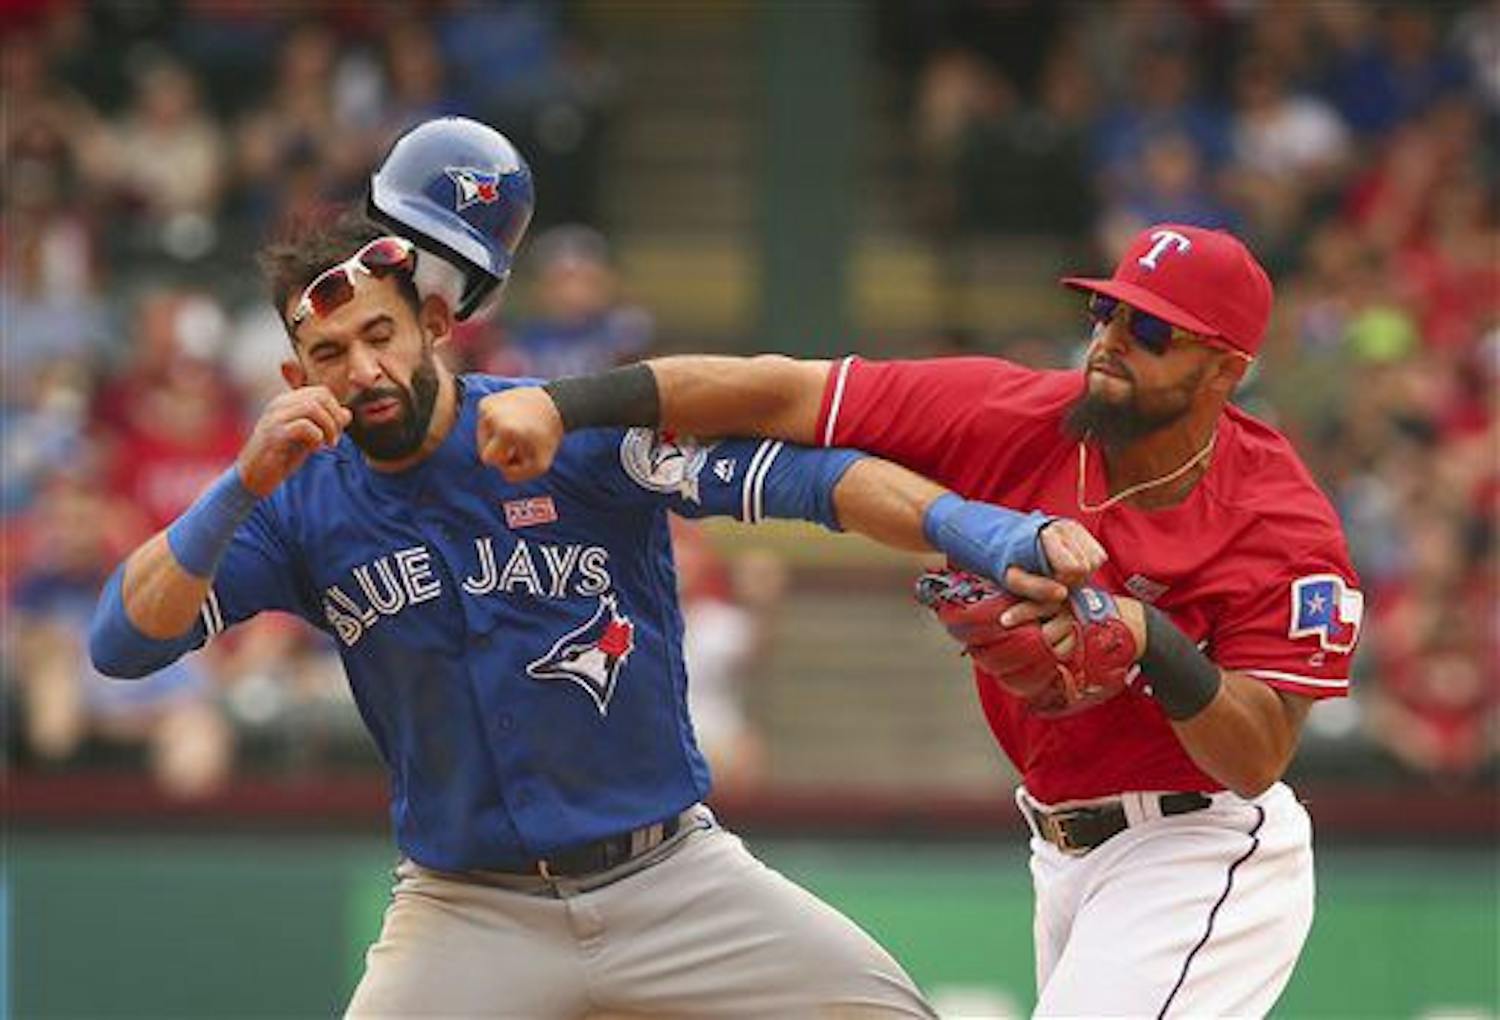 Toronto Blue Jays Jose Bautista (19) gets hit by Texas Rangers second baseman Rougned Odor (12) after Bautista slid into second in the eighth inning of a baseball game at Globe Life Park in Arlington, Texas, Sunday May 15, 2016. (Richard W. Rodriguez/Star-Telegram via AP)